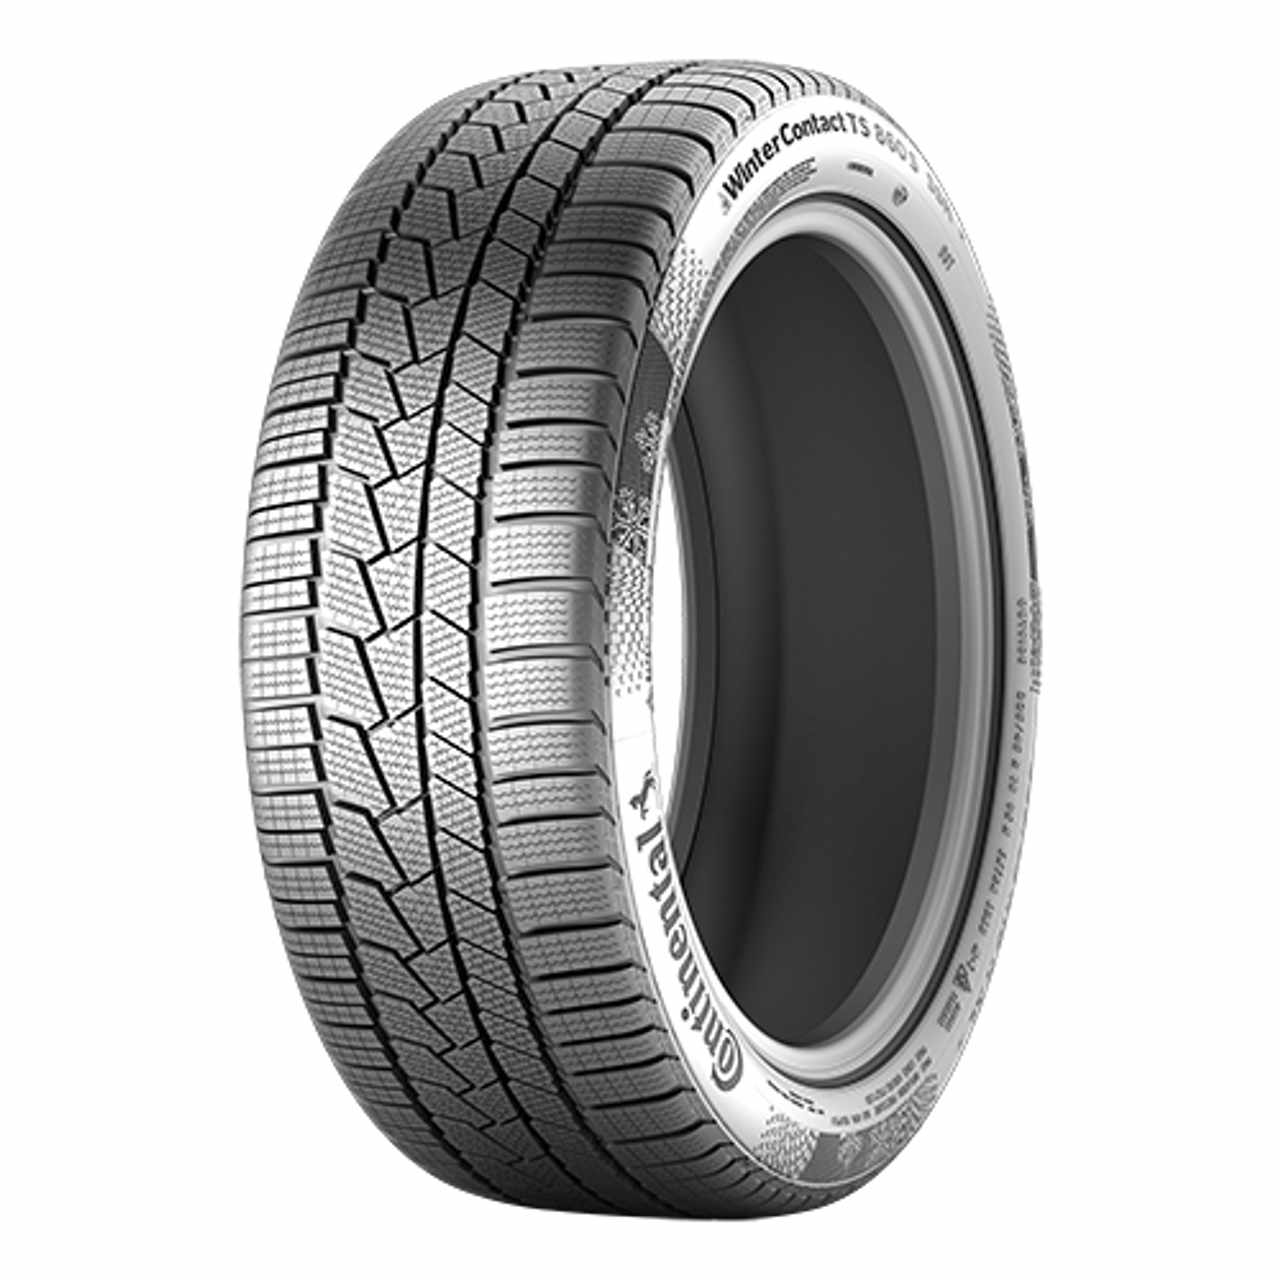 CONTINENTAL WINTERCONTACT TS 860 S (*) 205/60R16 96H BSW von Continental